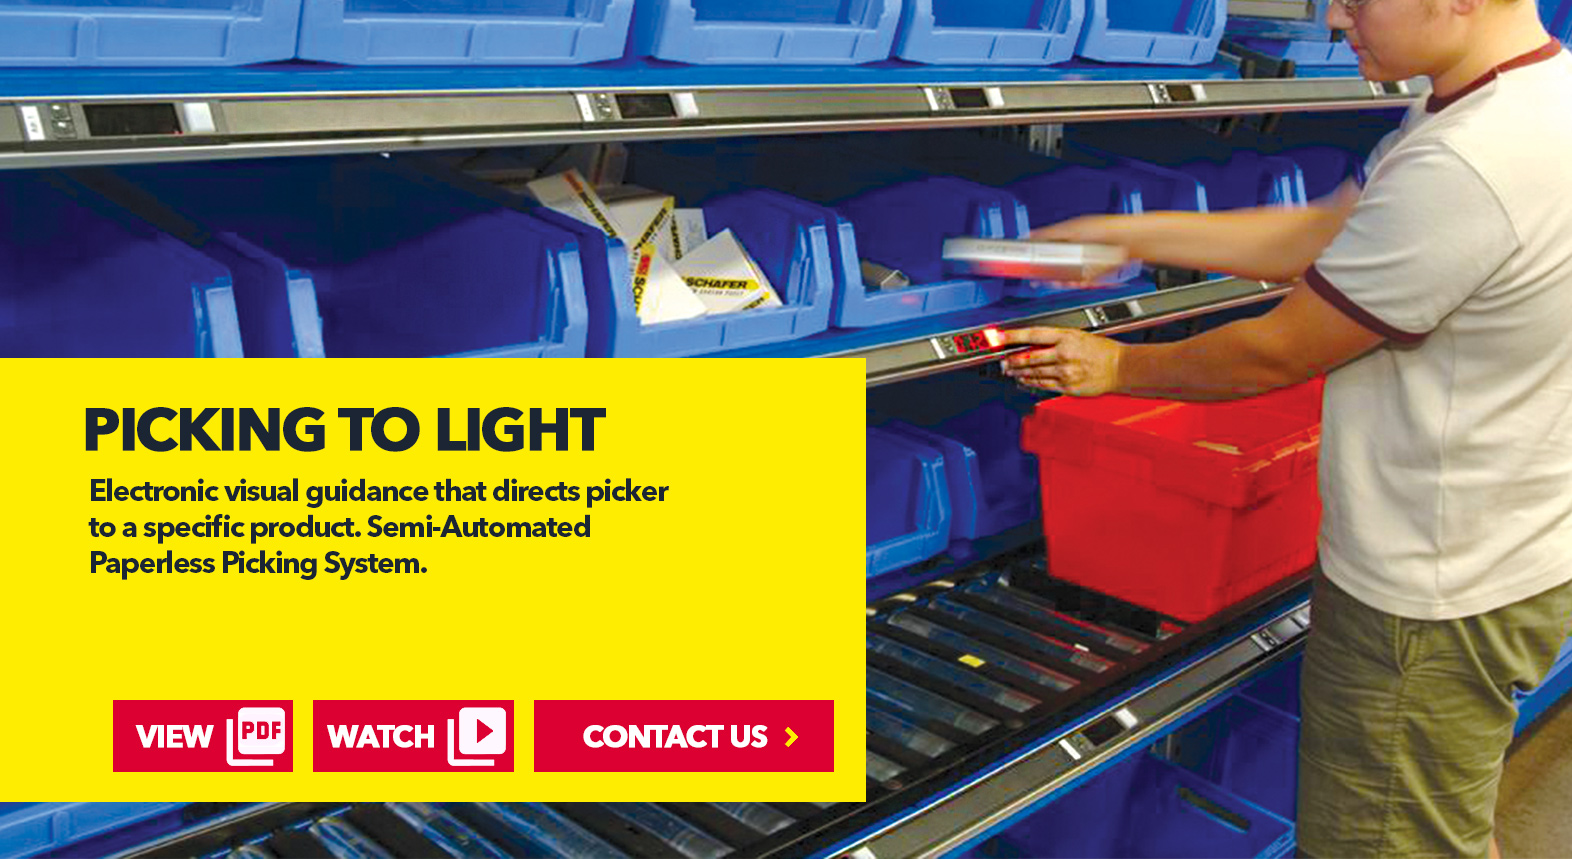 Picking to Light by SSI Schaefer USA Download Guide, Watch Video, Contact Us. www.chaefershelving.com